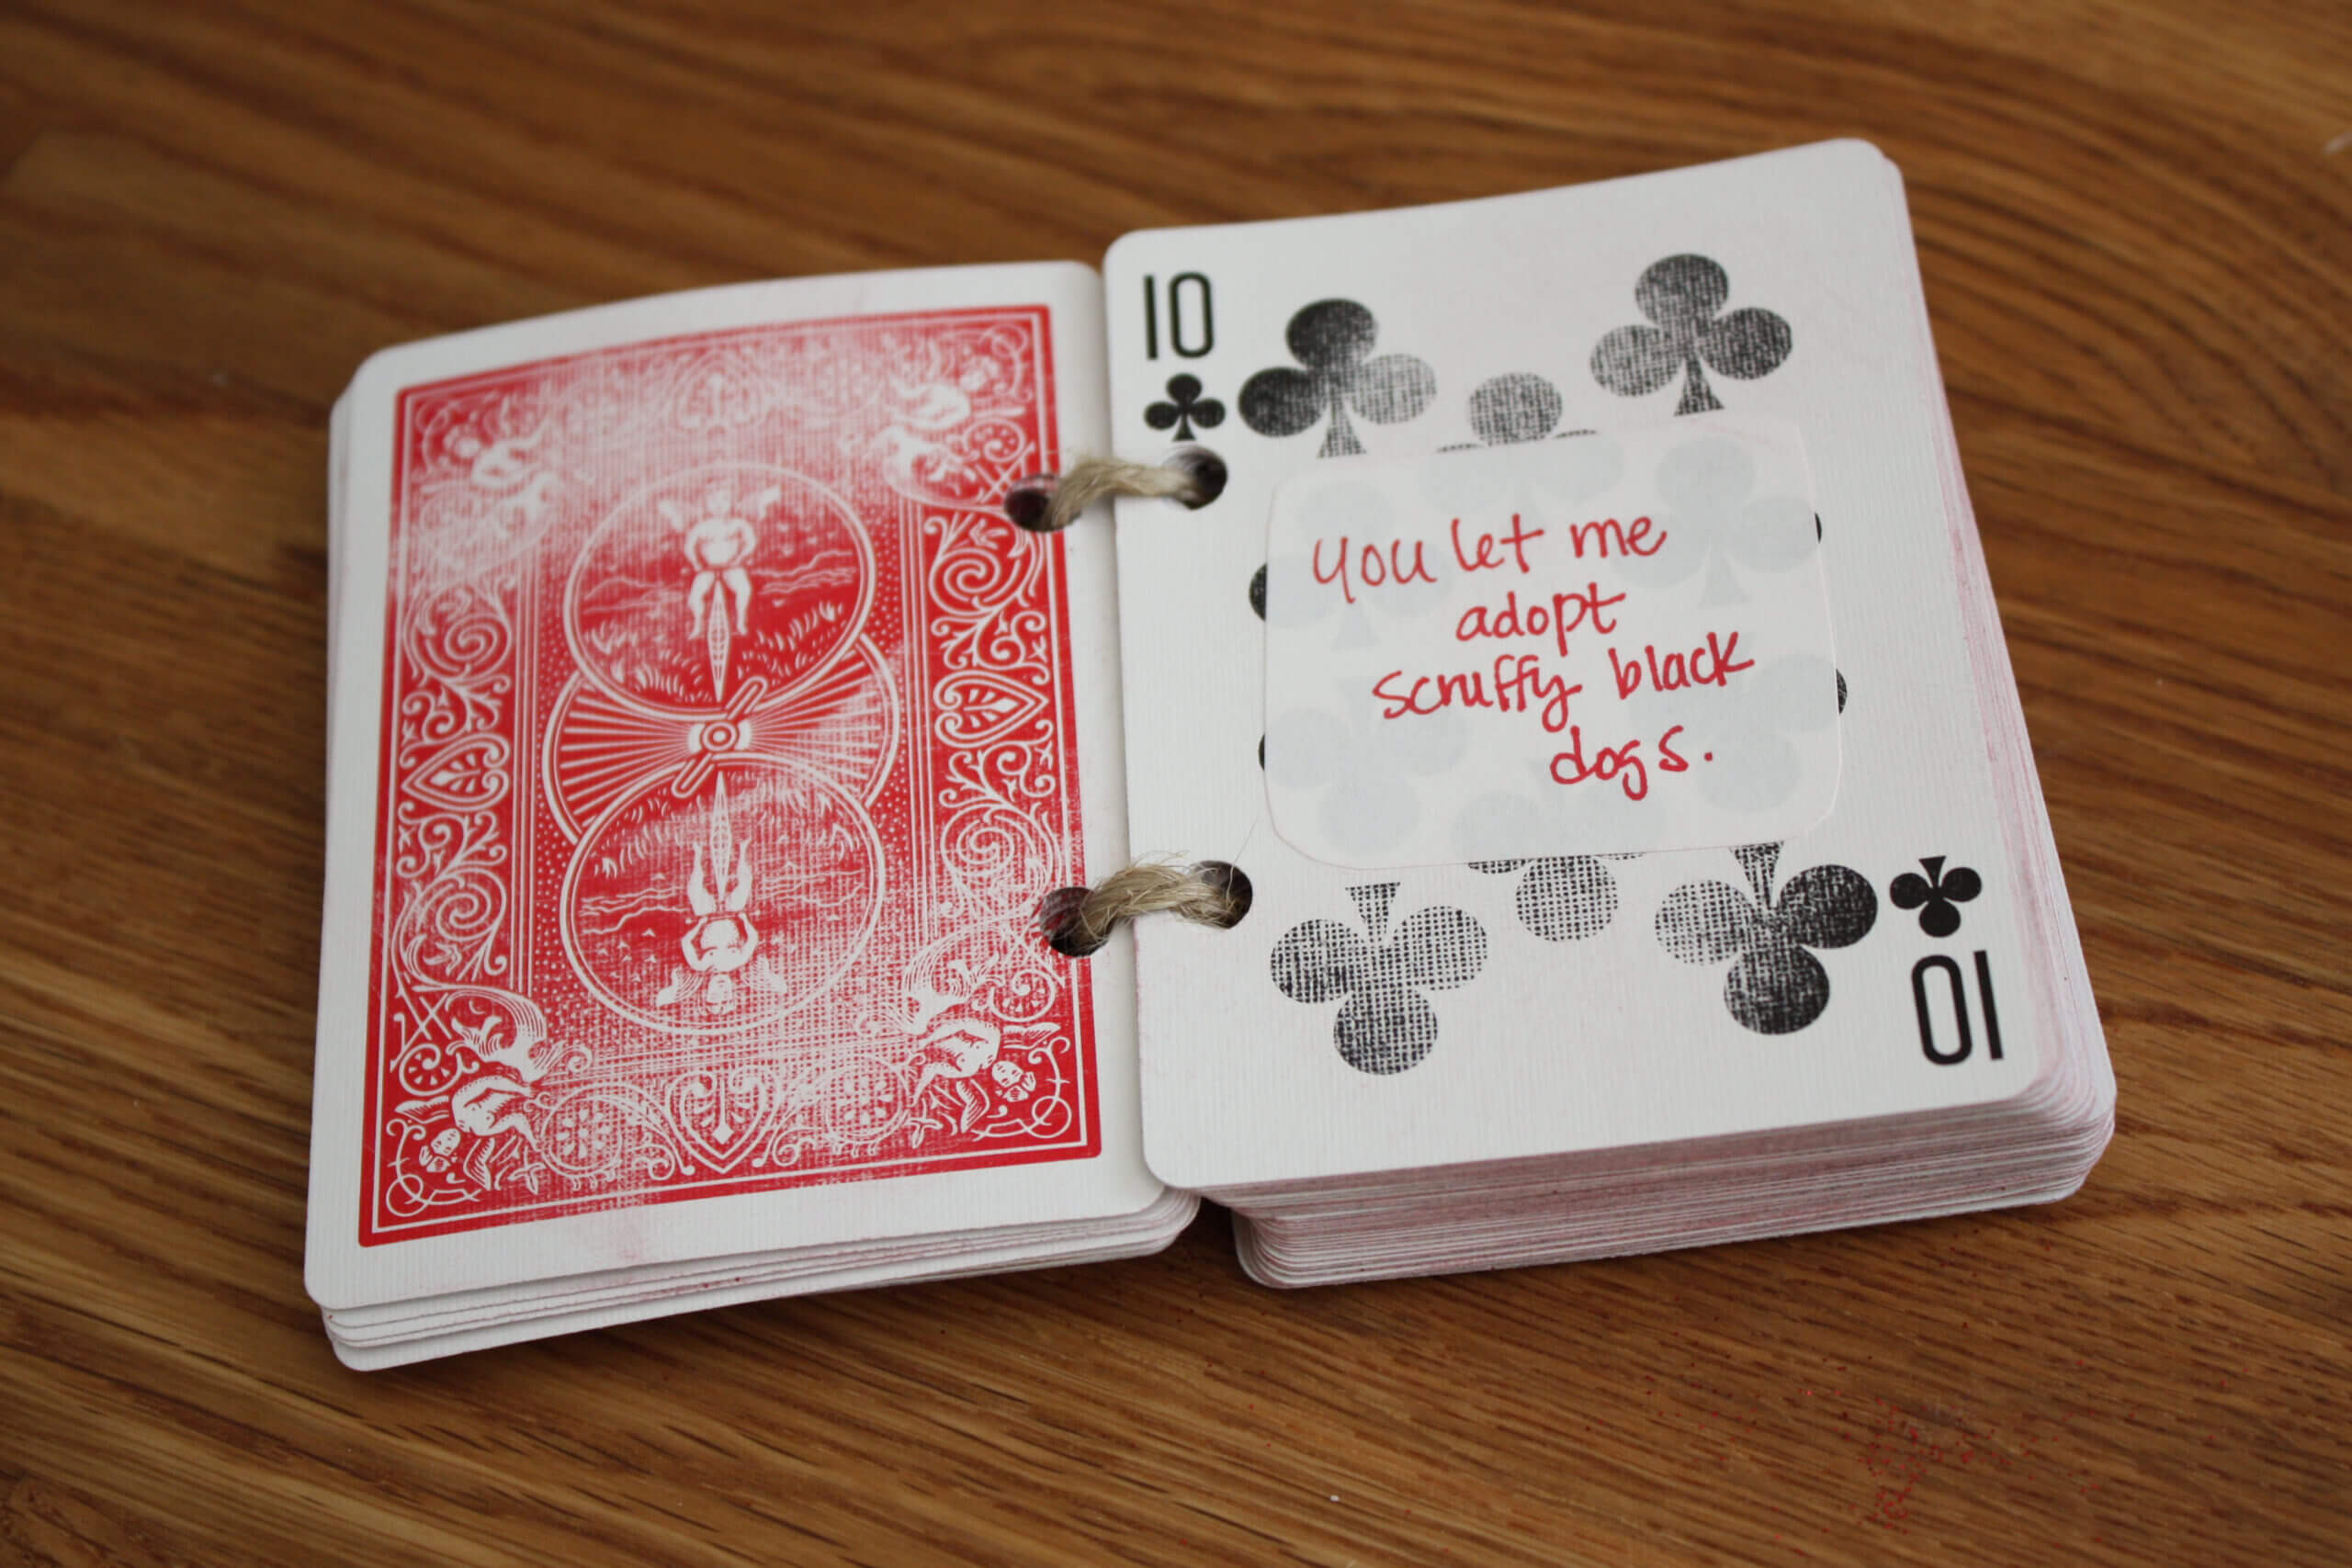 52 Reasons I Love You – Calep.midnightpig.co With 52 Things I Love About You Cards Template